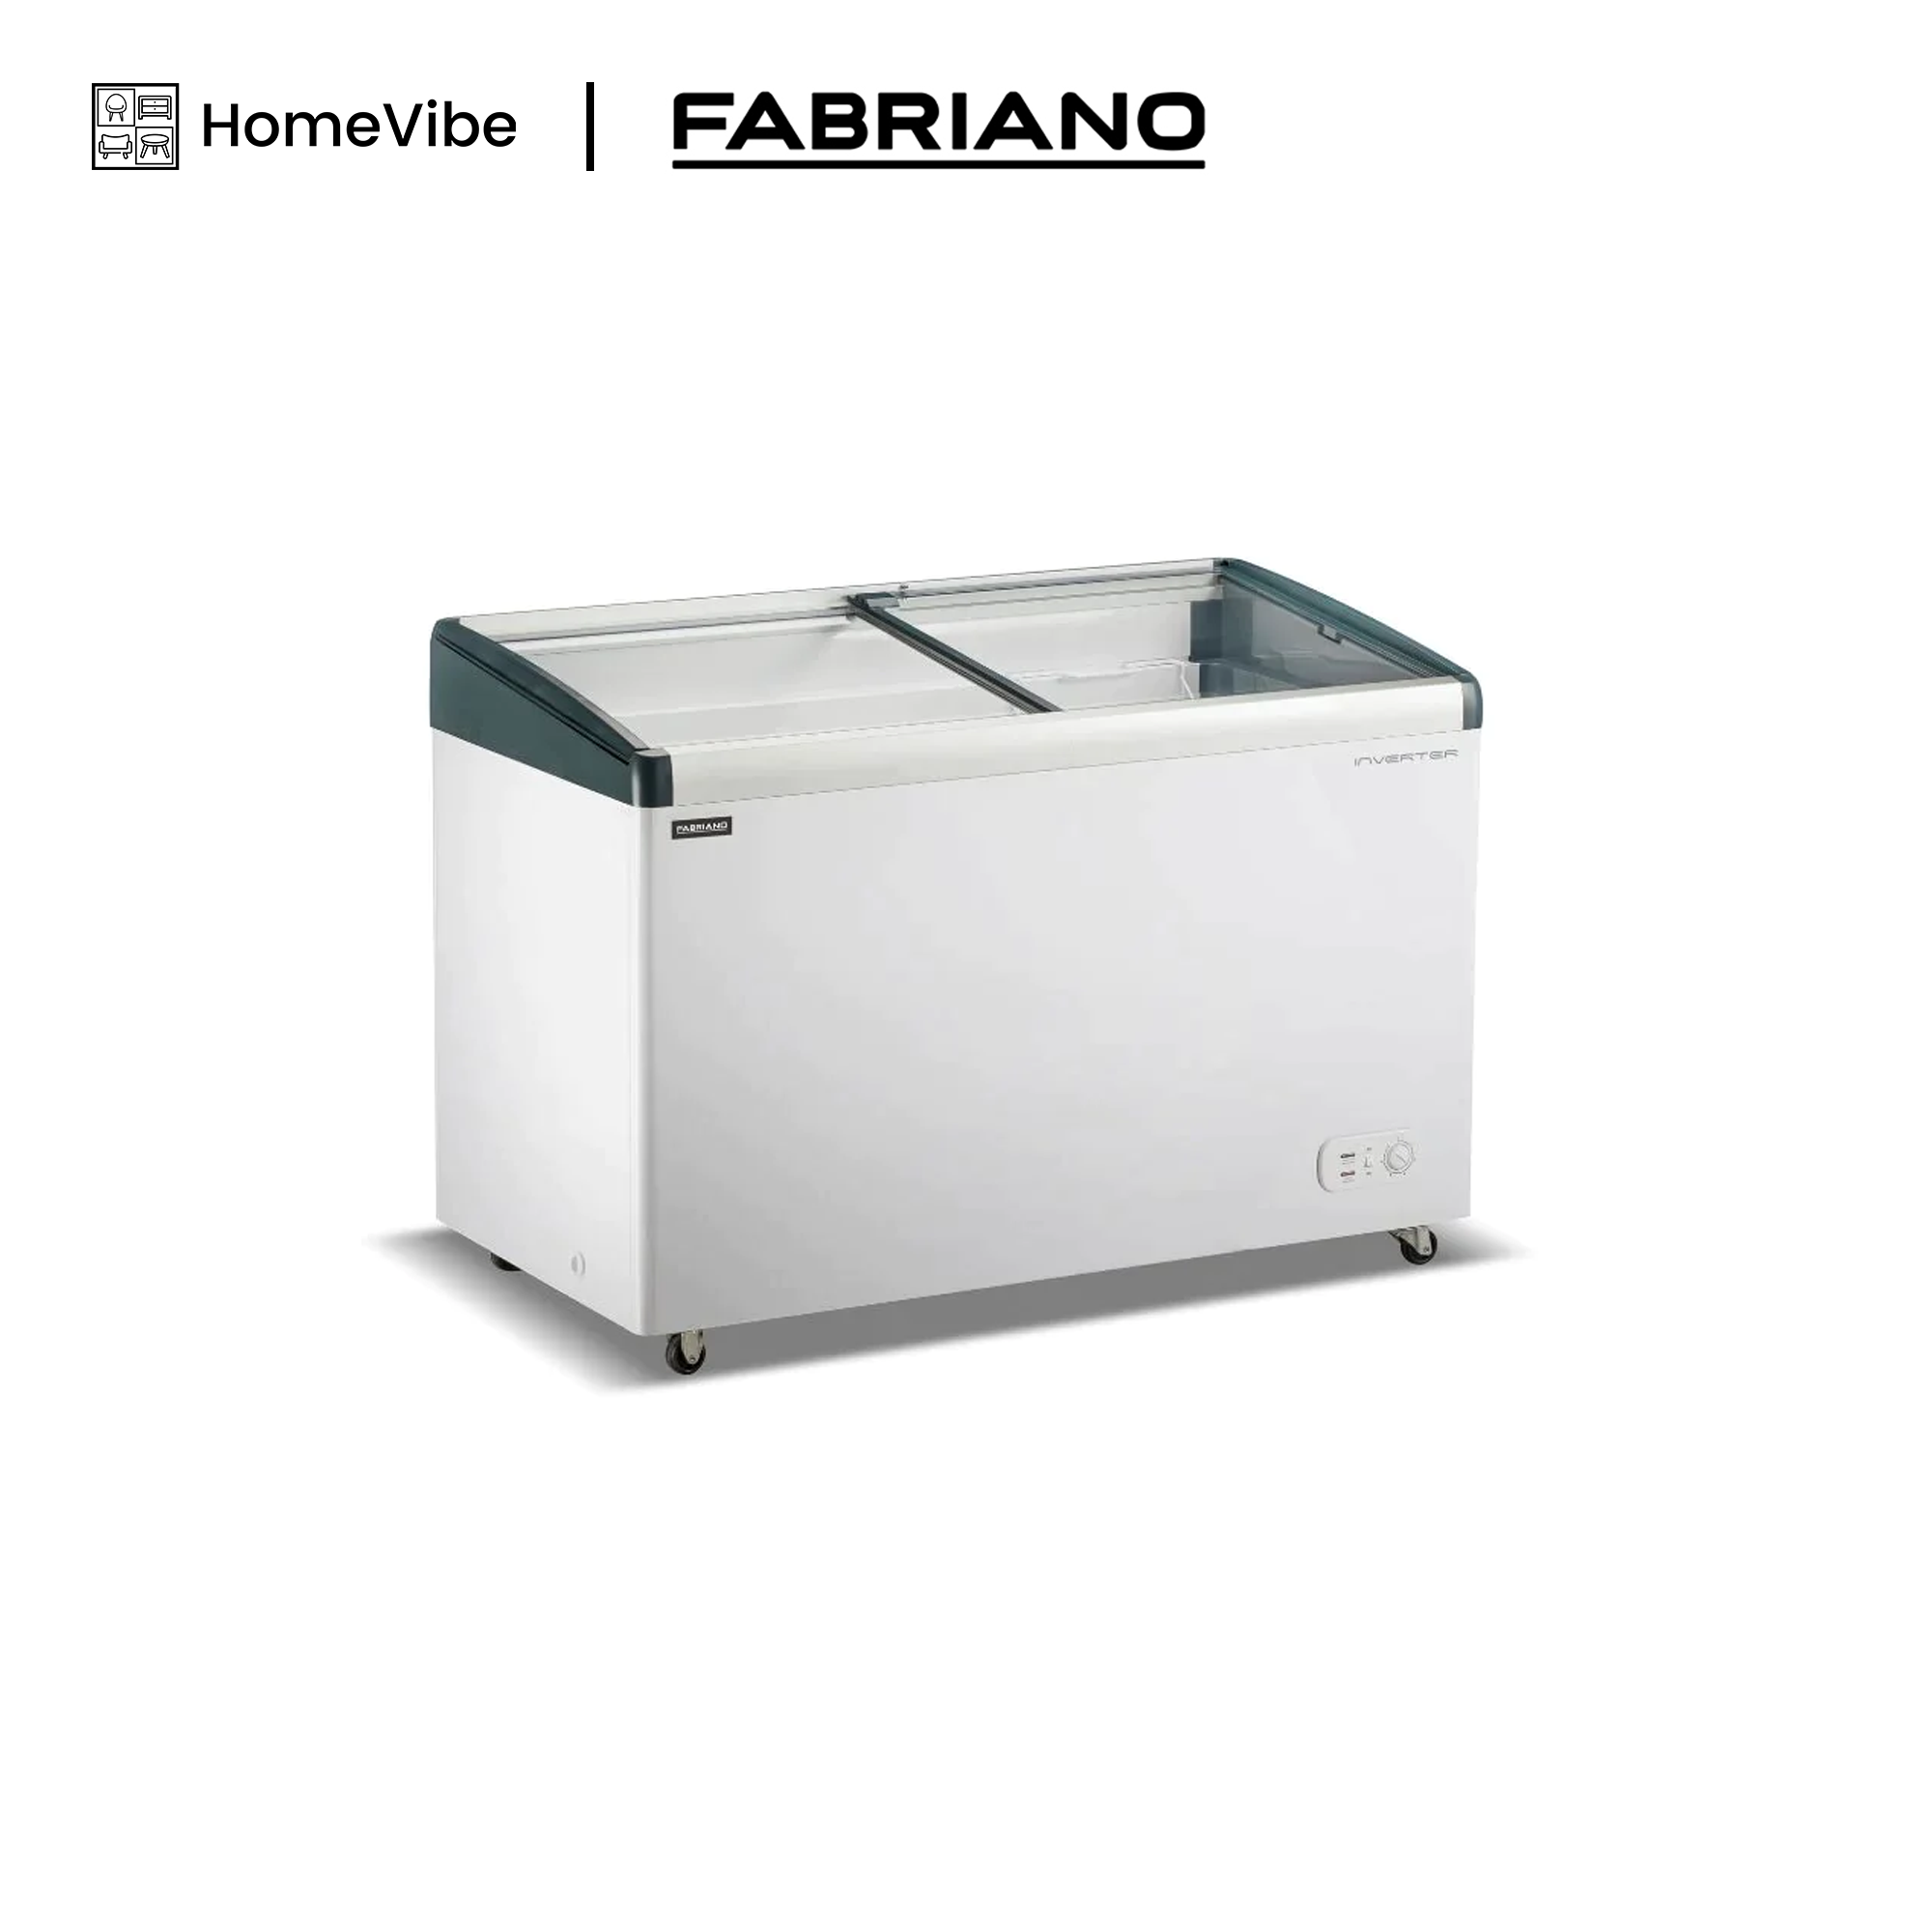 Fabriano 14cuft INVERTER Showcase Dual Function Chest Freezer FGTC14SG-I